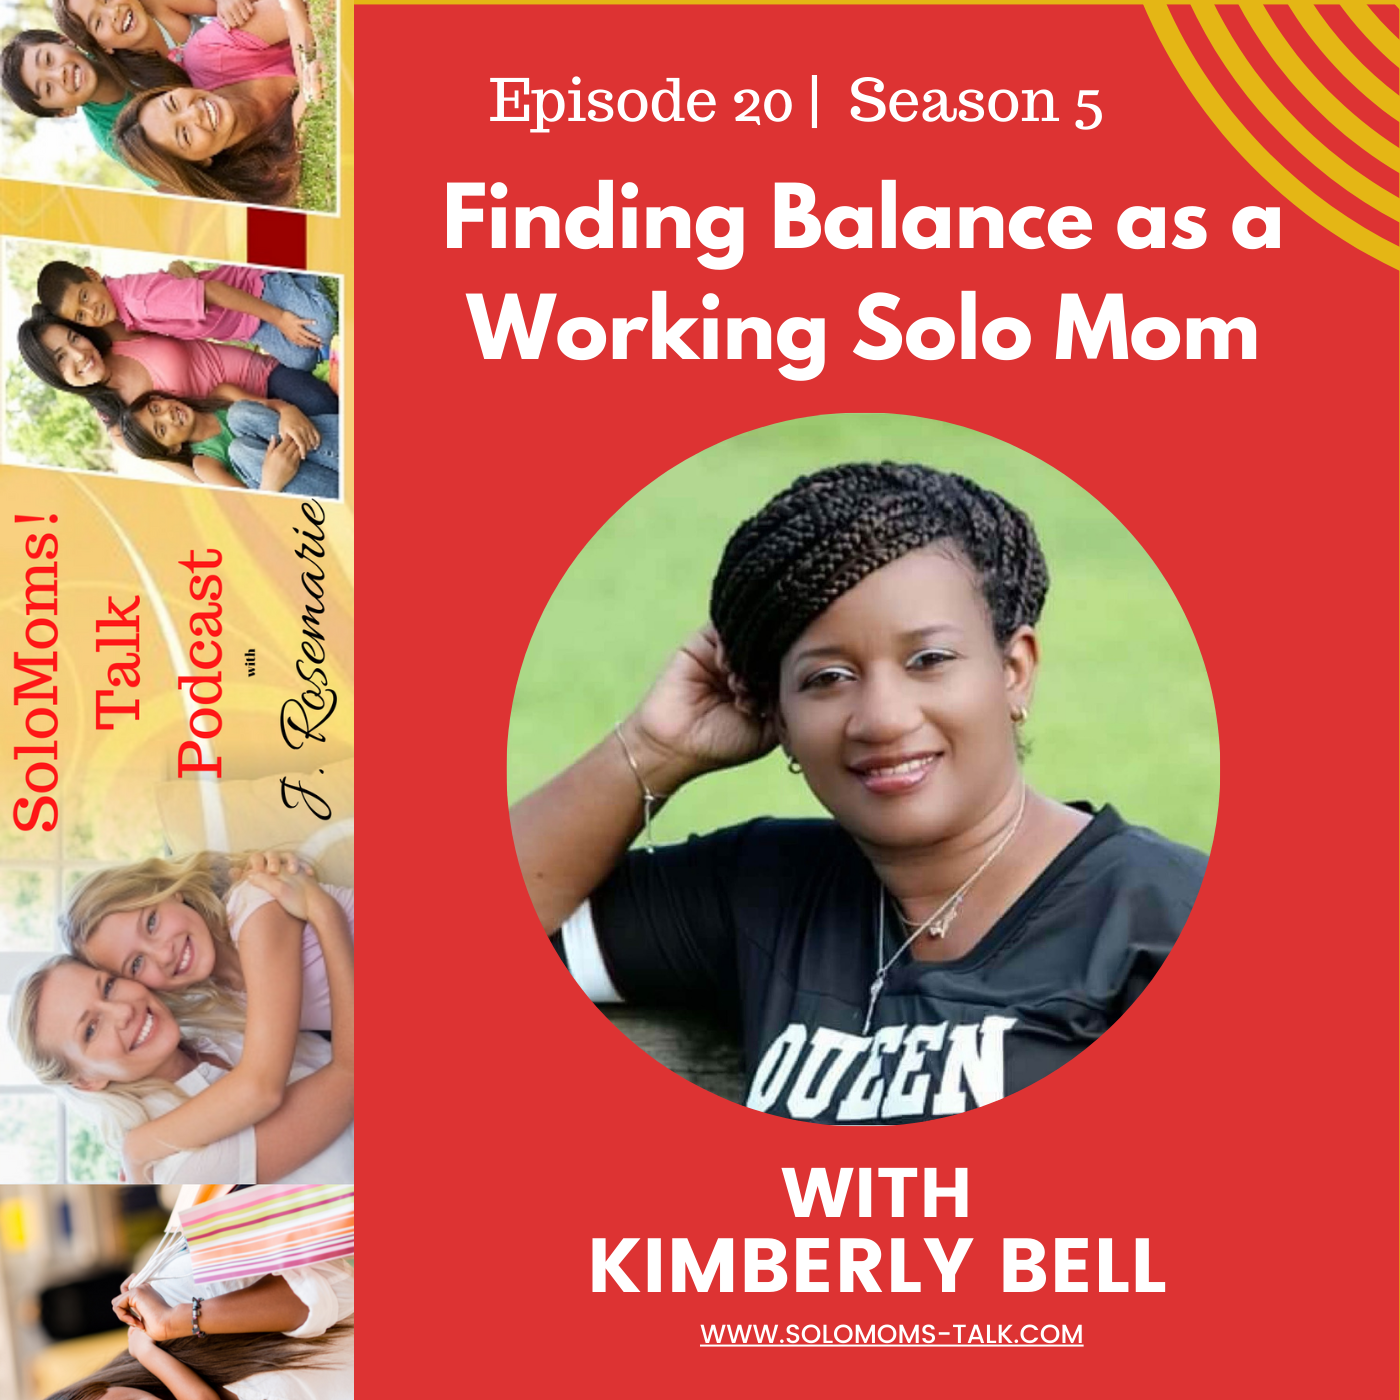 Finding Balance as a Working Solo Mom w/Kimberly Bell